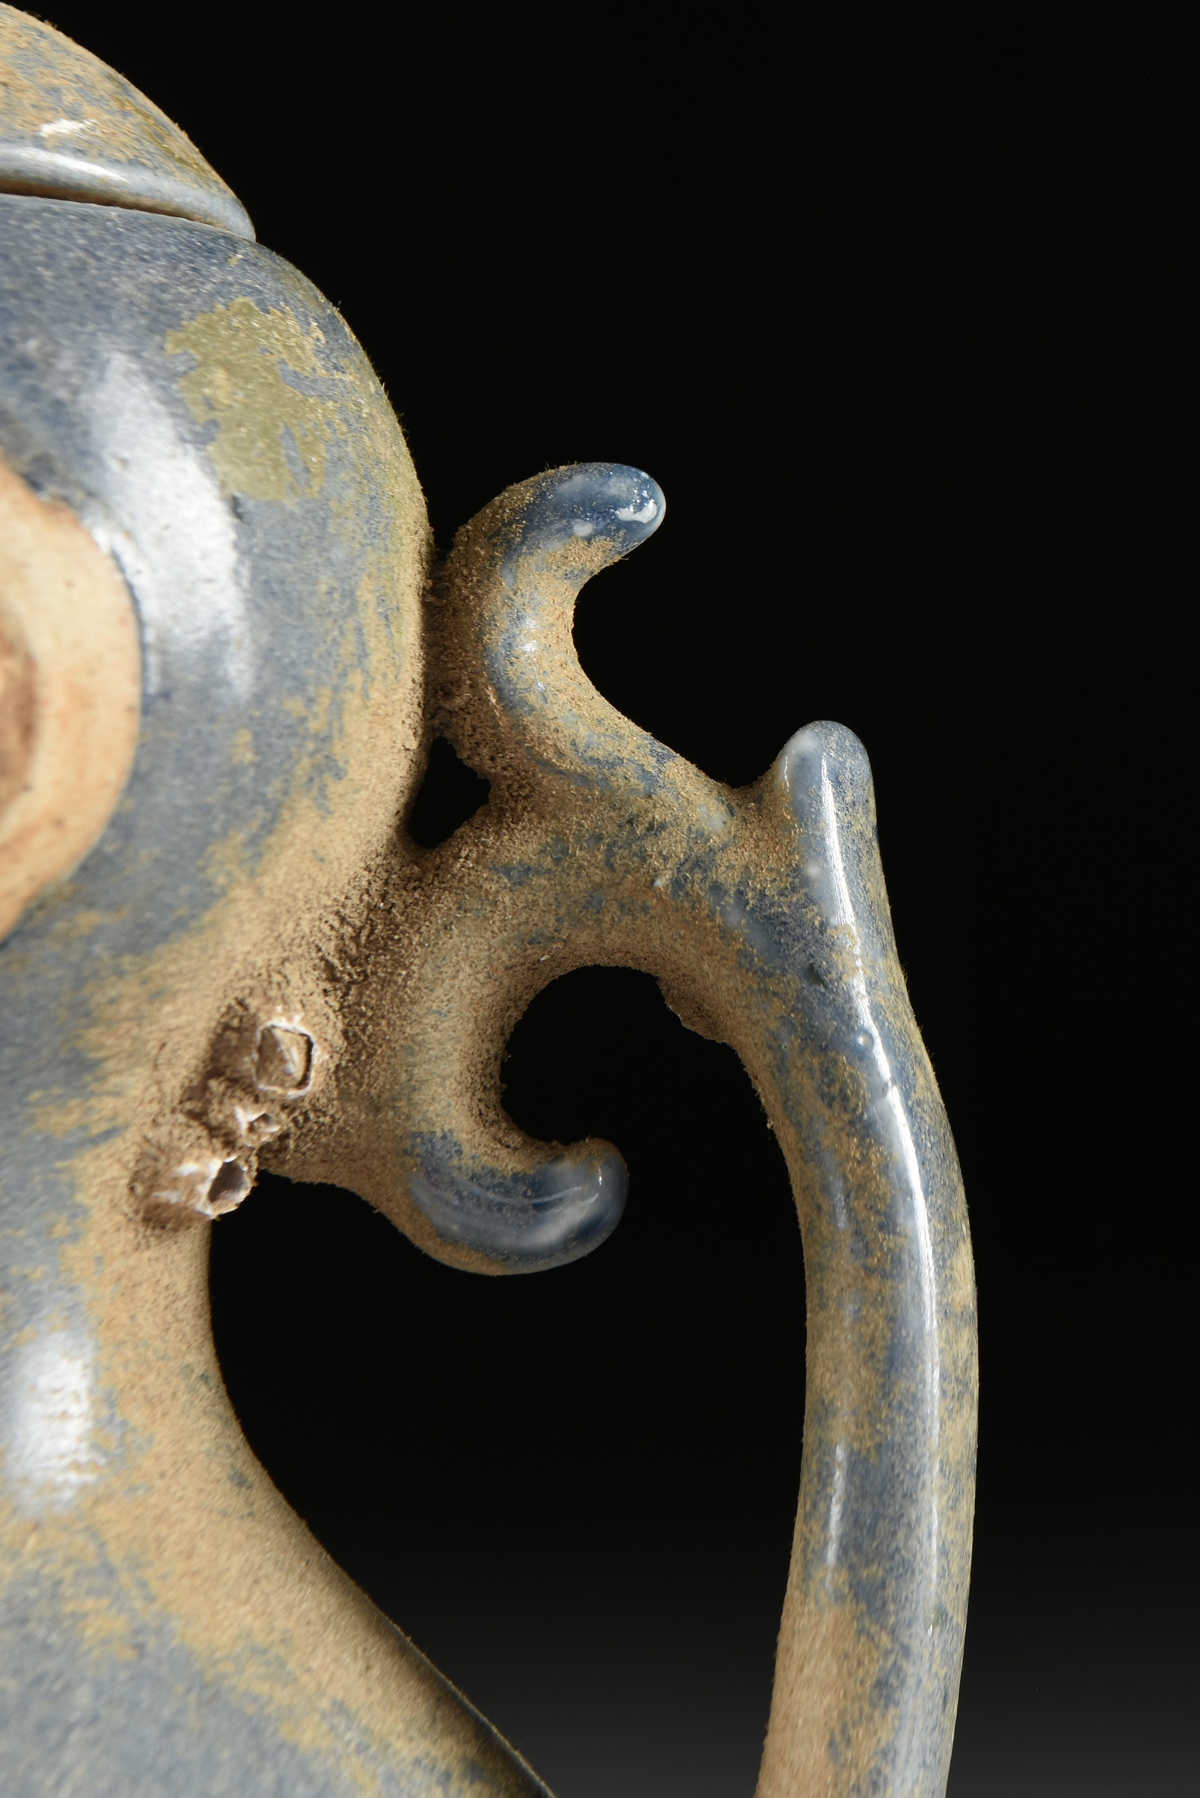 A VIETNAMESE/ANNAMESE BLUE GLAZED DOUBLE GOURD PORCELAIN EWER, SHIPWRECK ARTIFACT, 15TH/16TH - Image 5 of 11